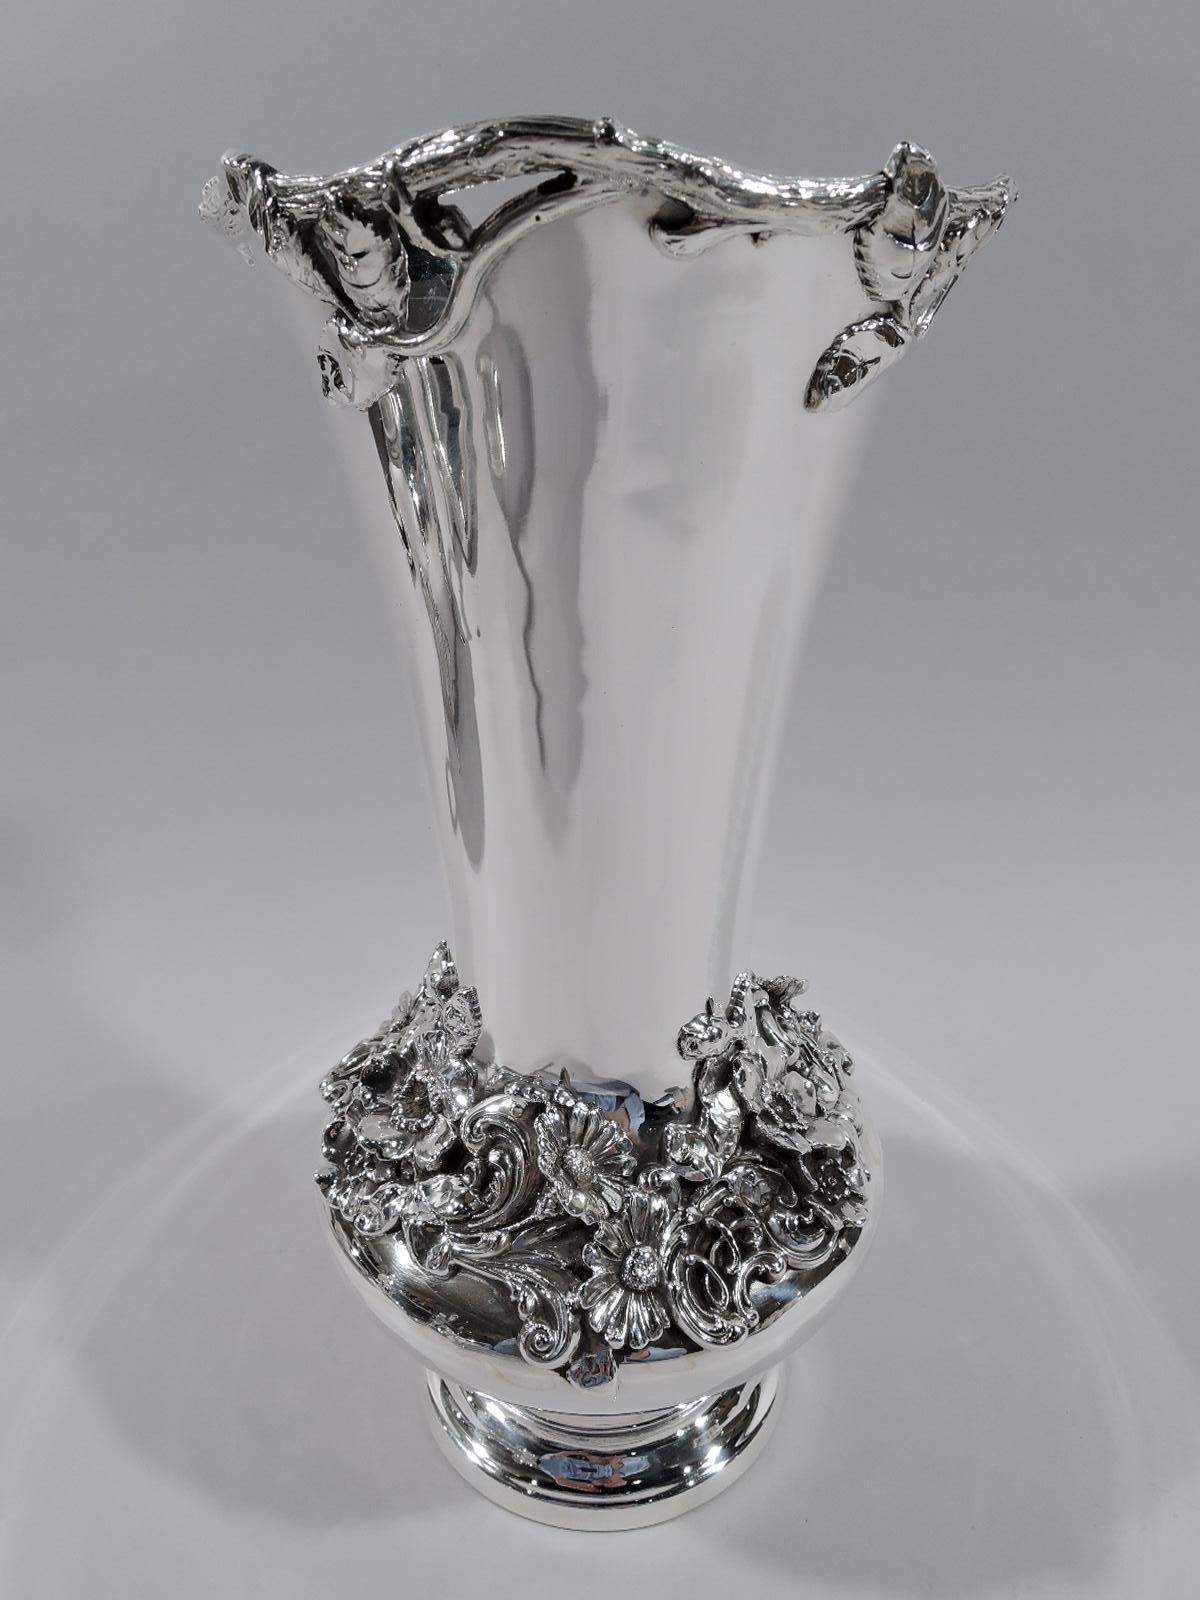 Turn-of-the-century sterling silver vase. Made by Graff, Washbourne & Dunn in New York. Bellied with tall and tapering neck and stepped foot. Dense flowers and scrolls applied to neck base. Waving leafy branch rim. Fresh and pretty. Fully marked and